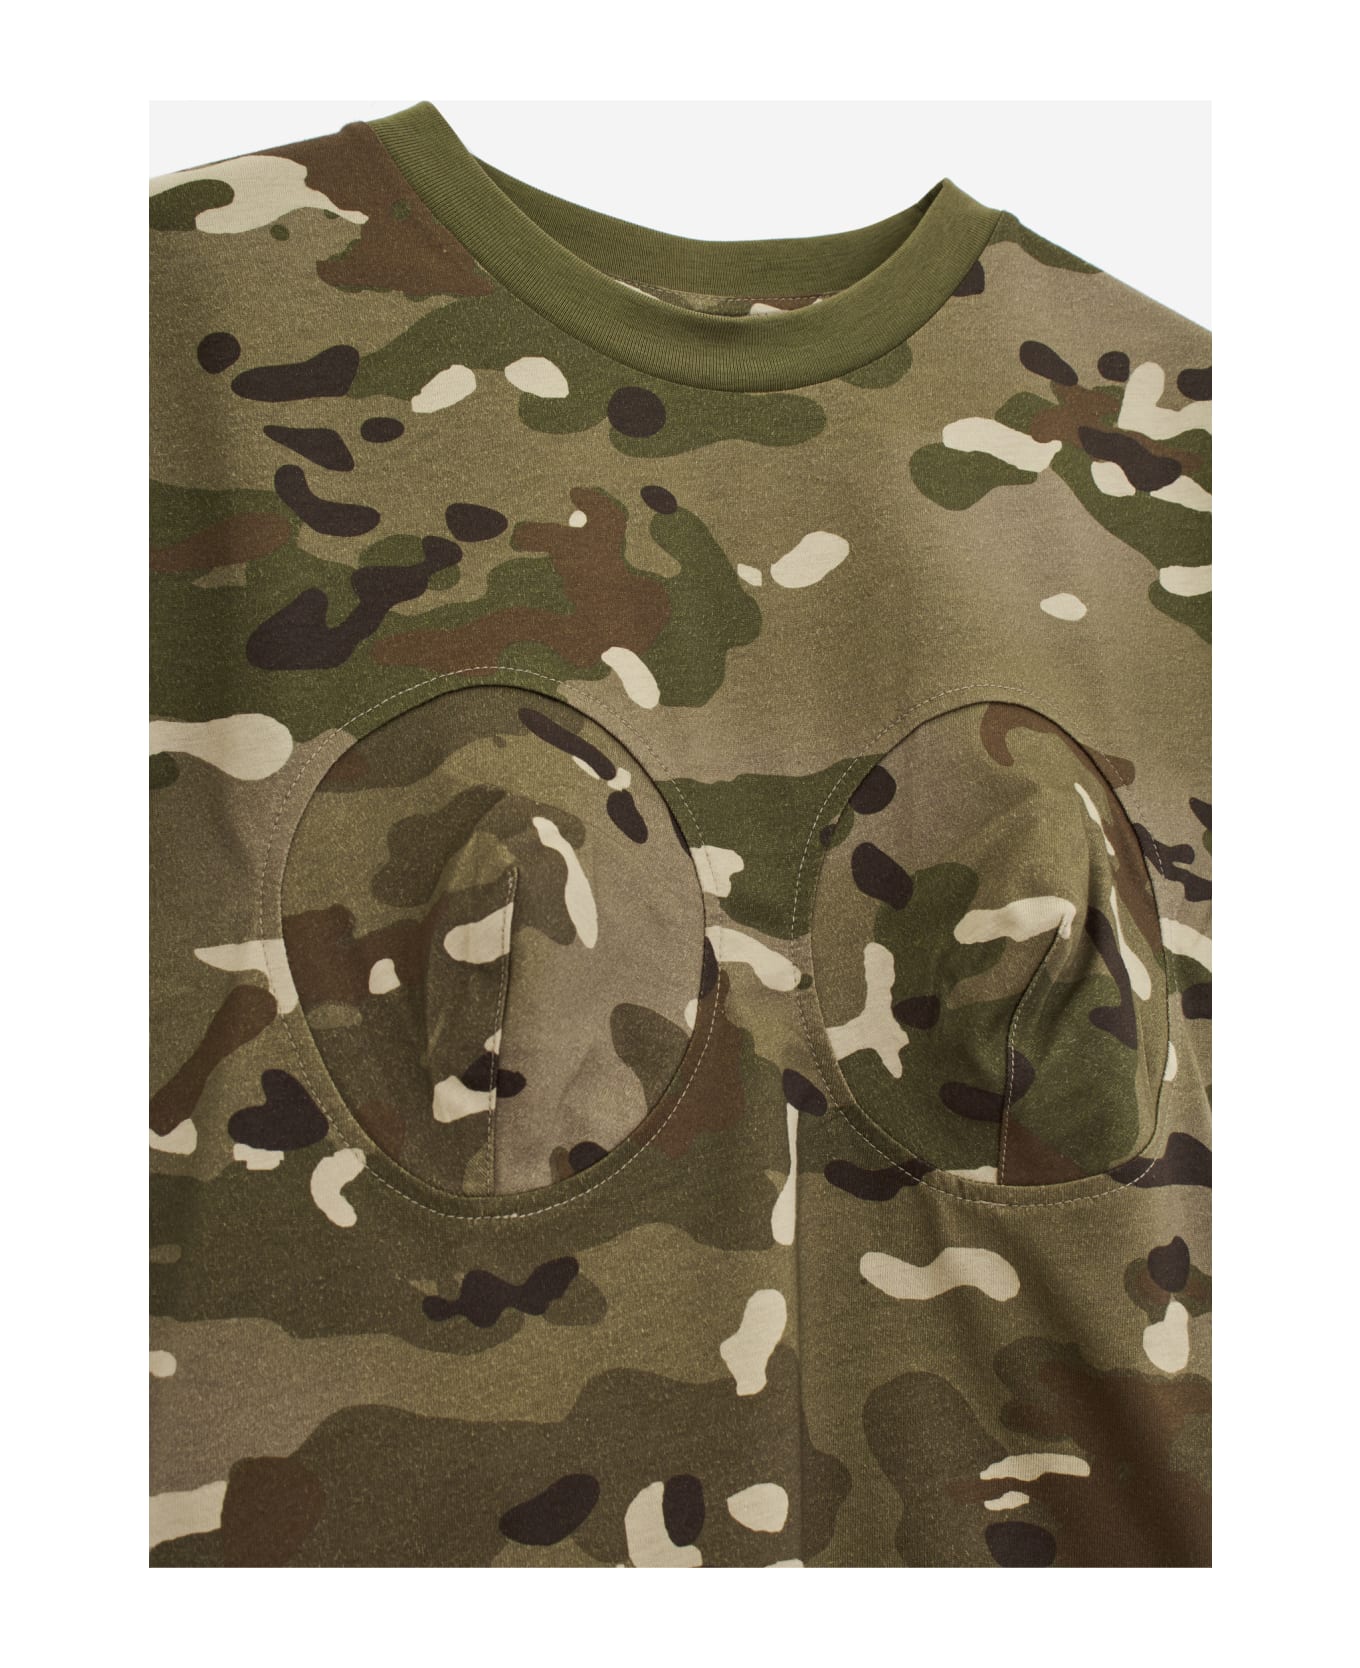 Vaquera Titty T-shirt - camouflage Tシャツ